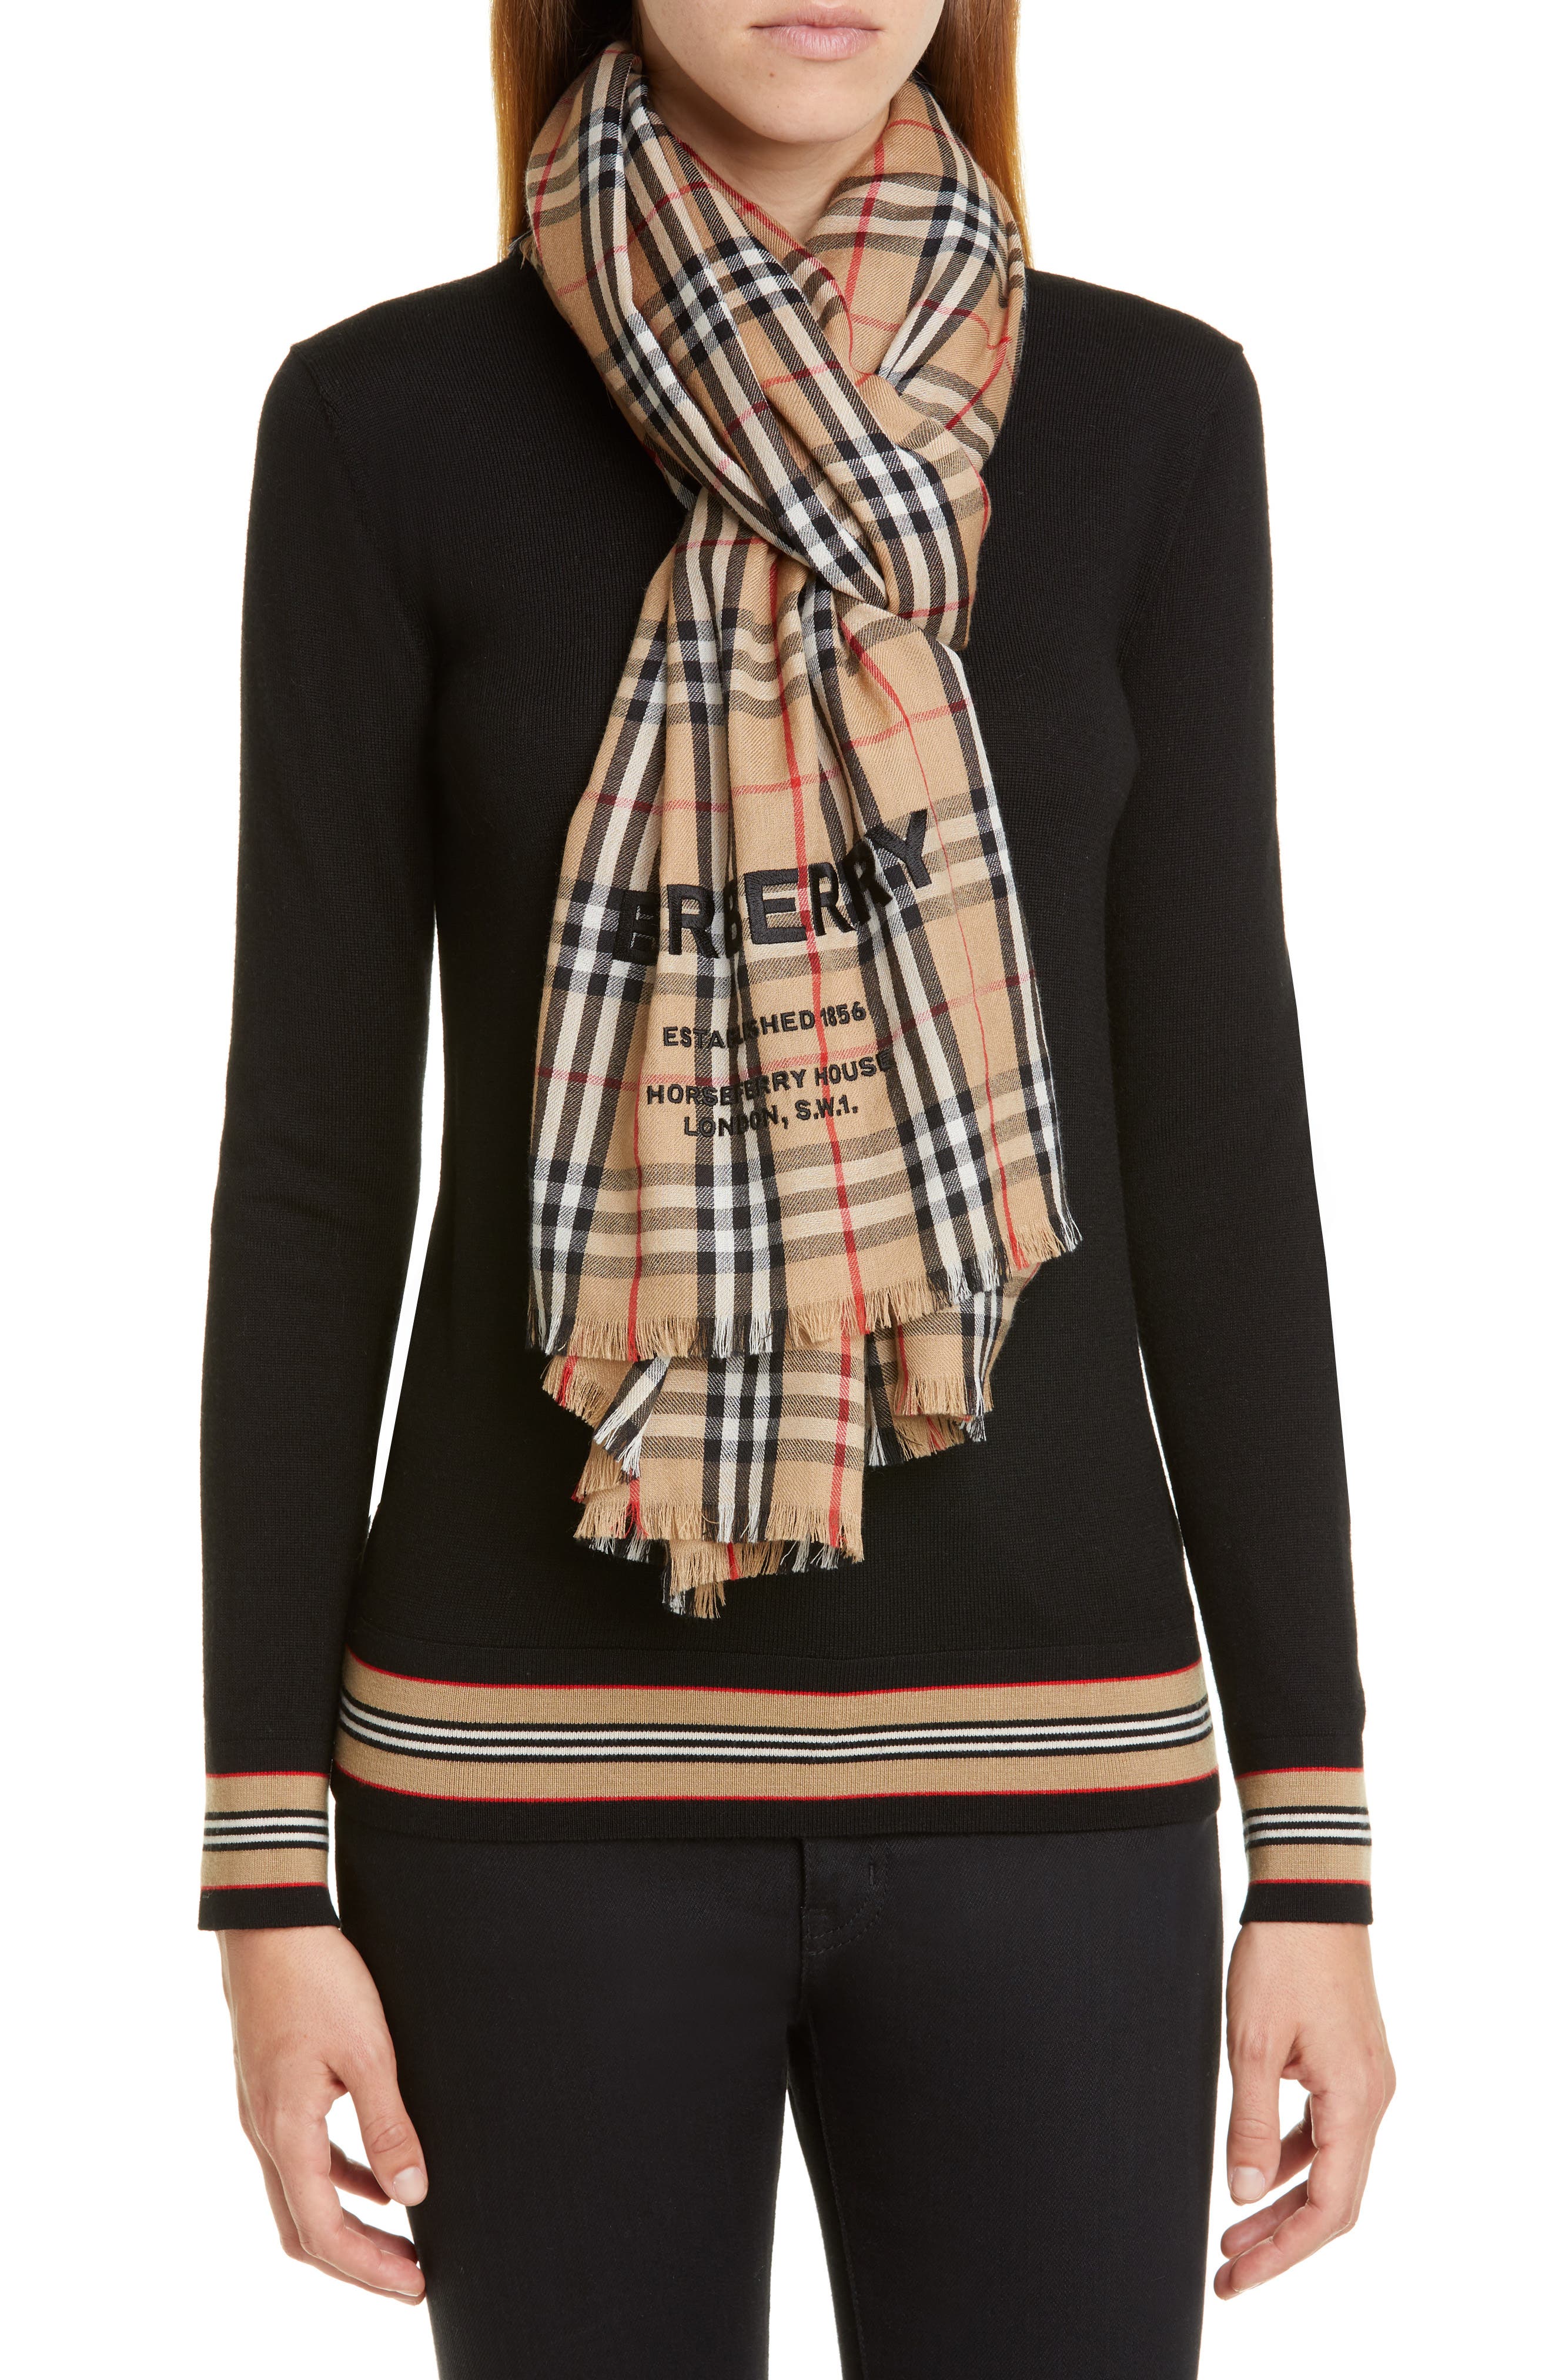 burberry scarf with horse logo